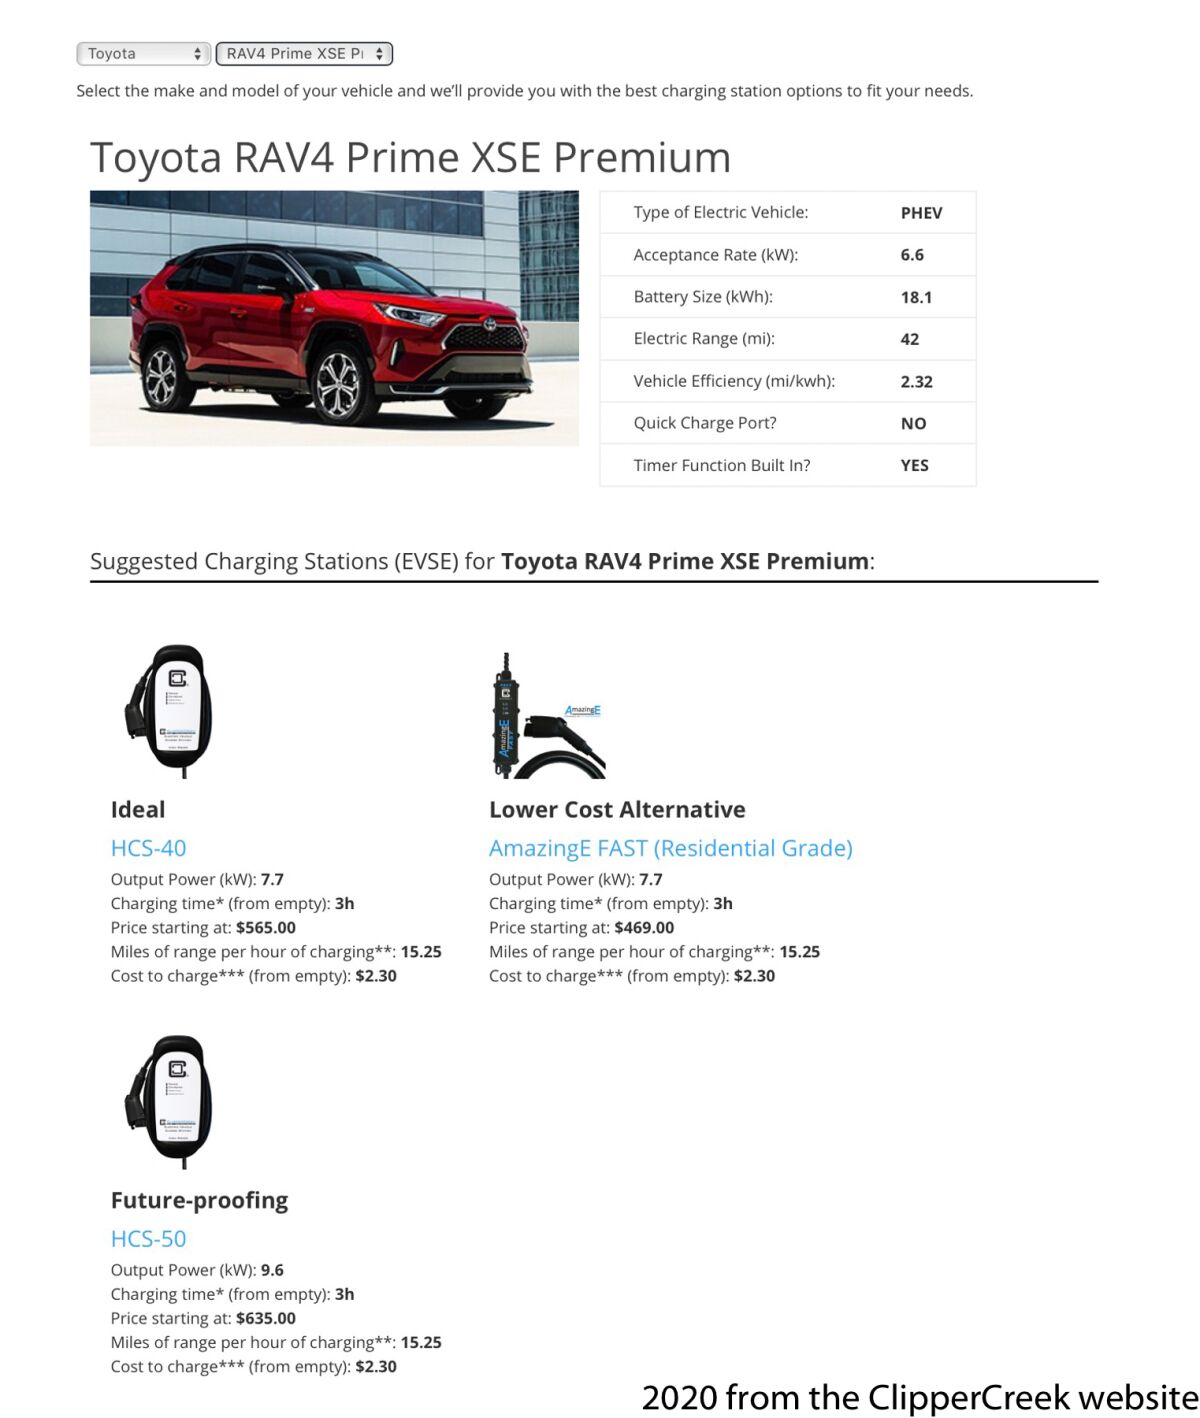 ClipperCreek recommended charge stations for RAV4 Prime XSE Premium